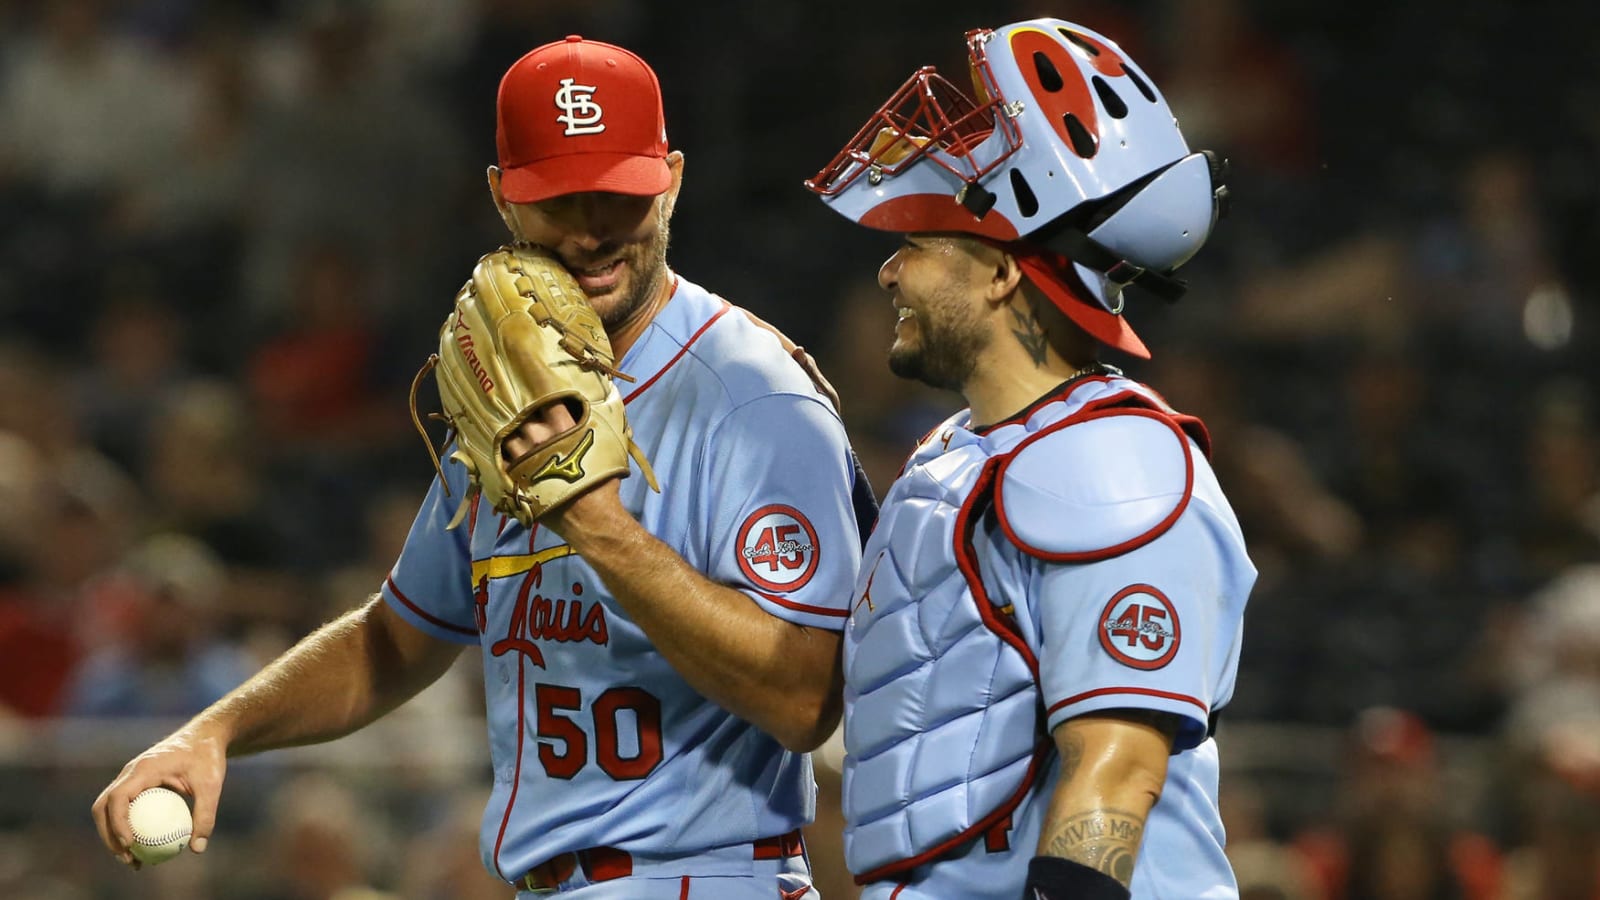 Emotionally I was way over the top': Yadier Molina, Adam Wainwright's  initial reaction as they broke MLB battery record